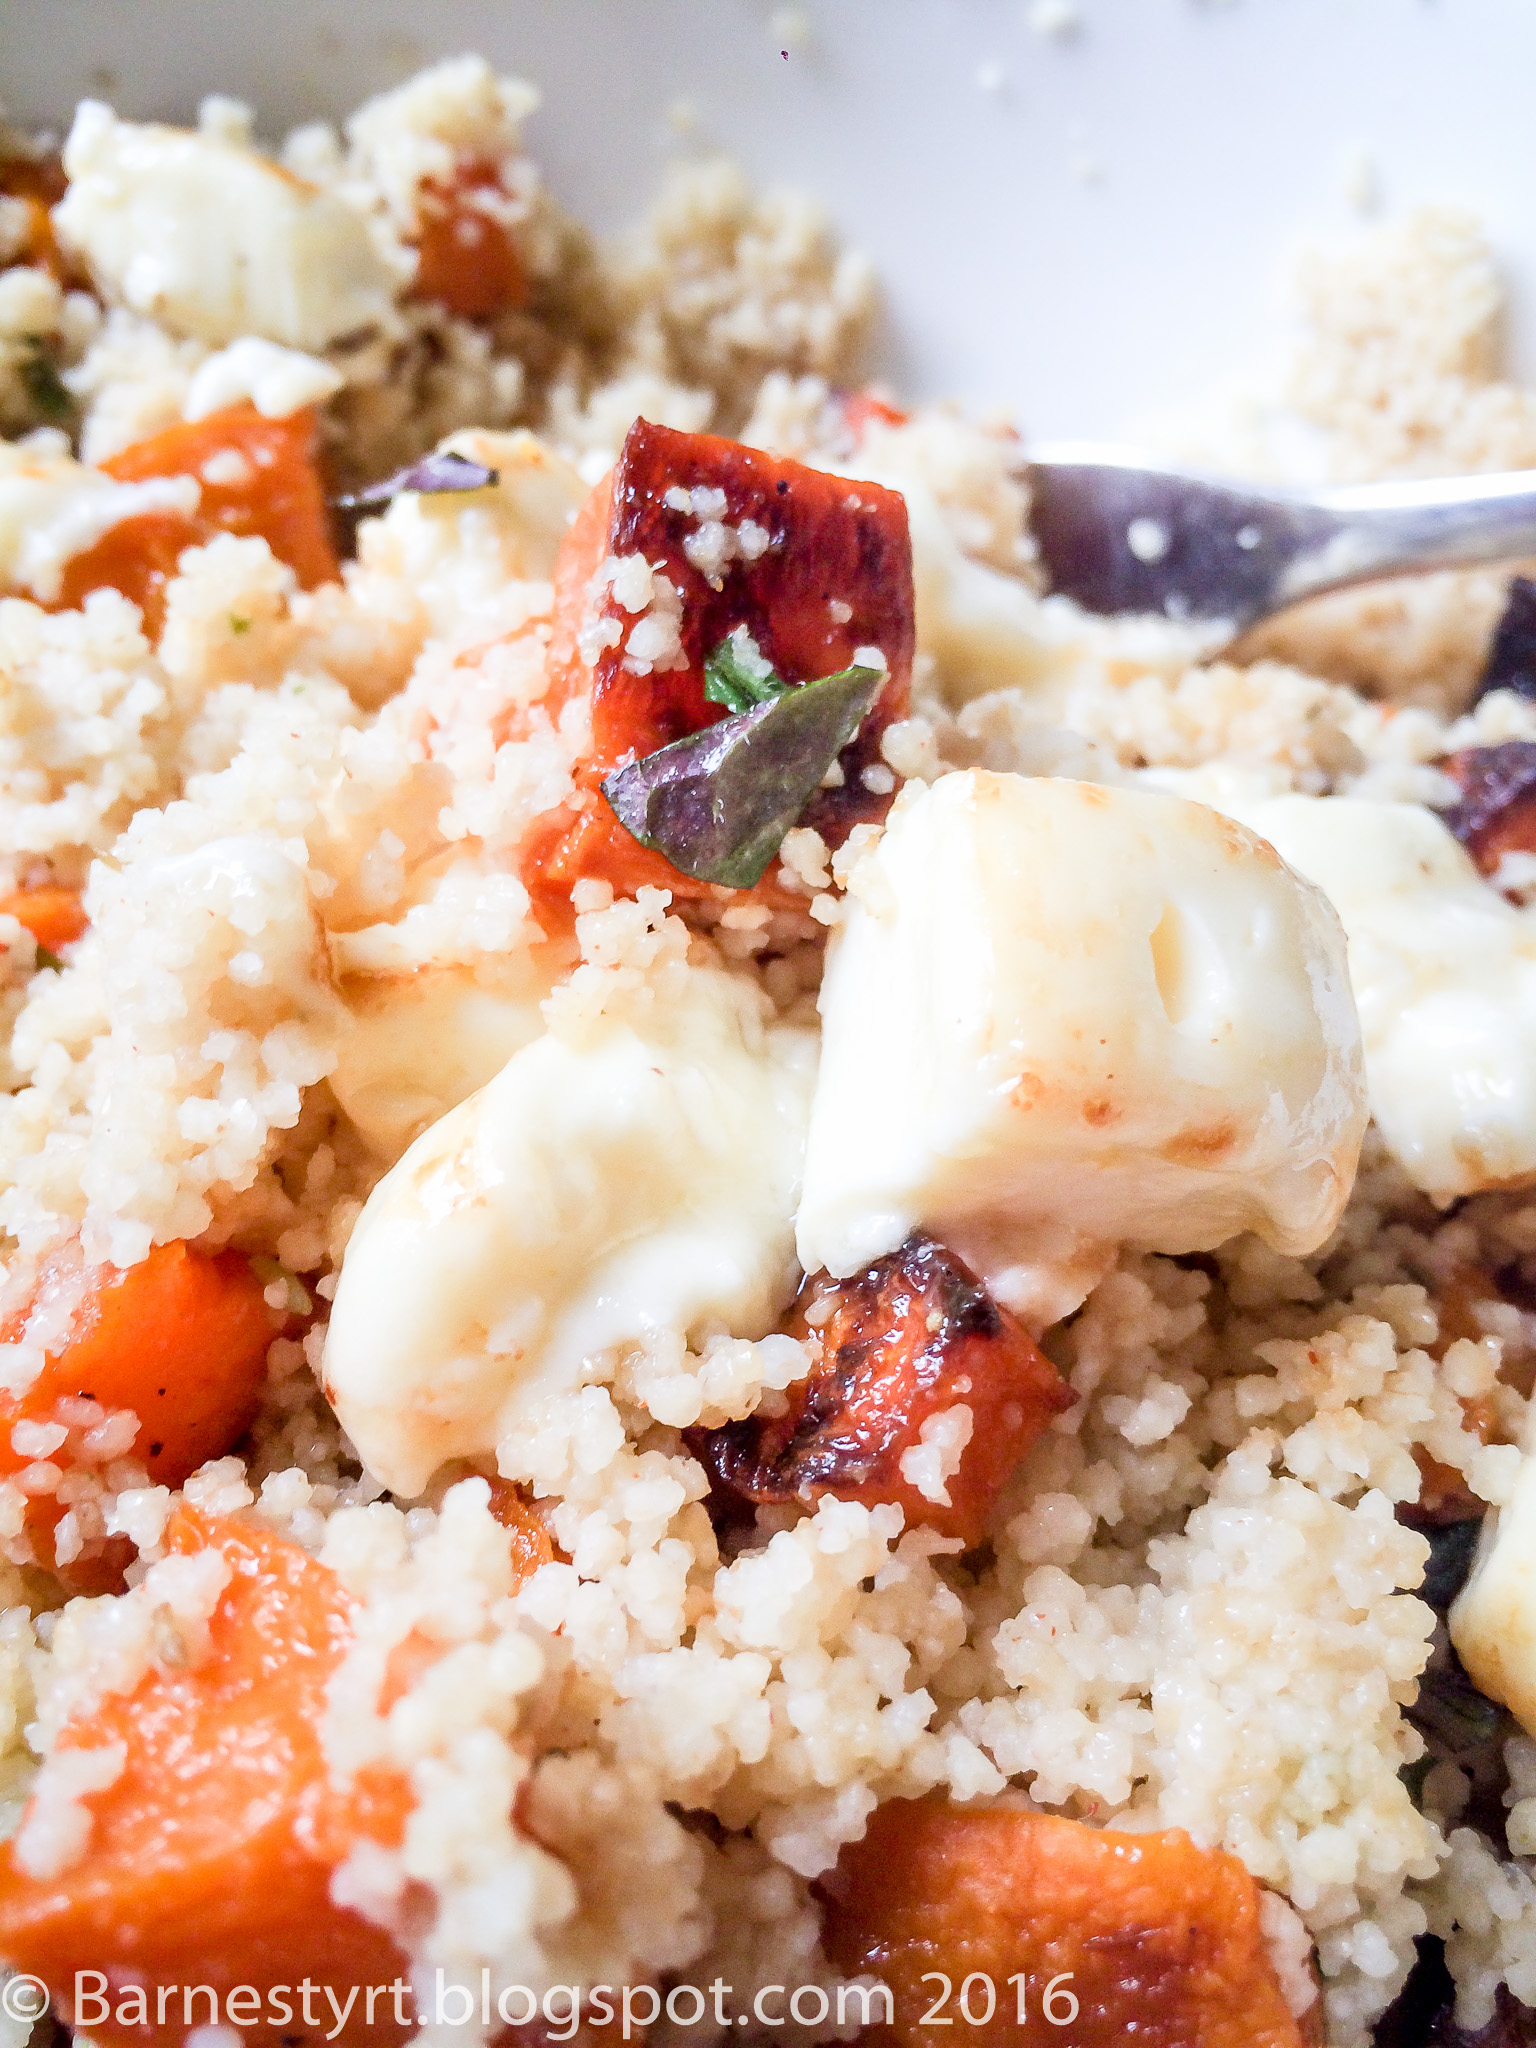 Couscous salad with halloumi and sweet potatoes